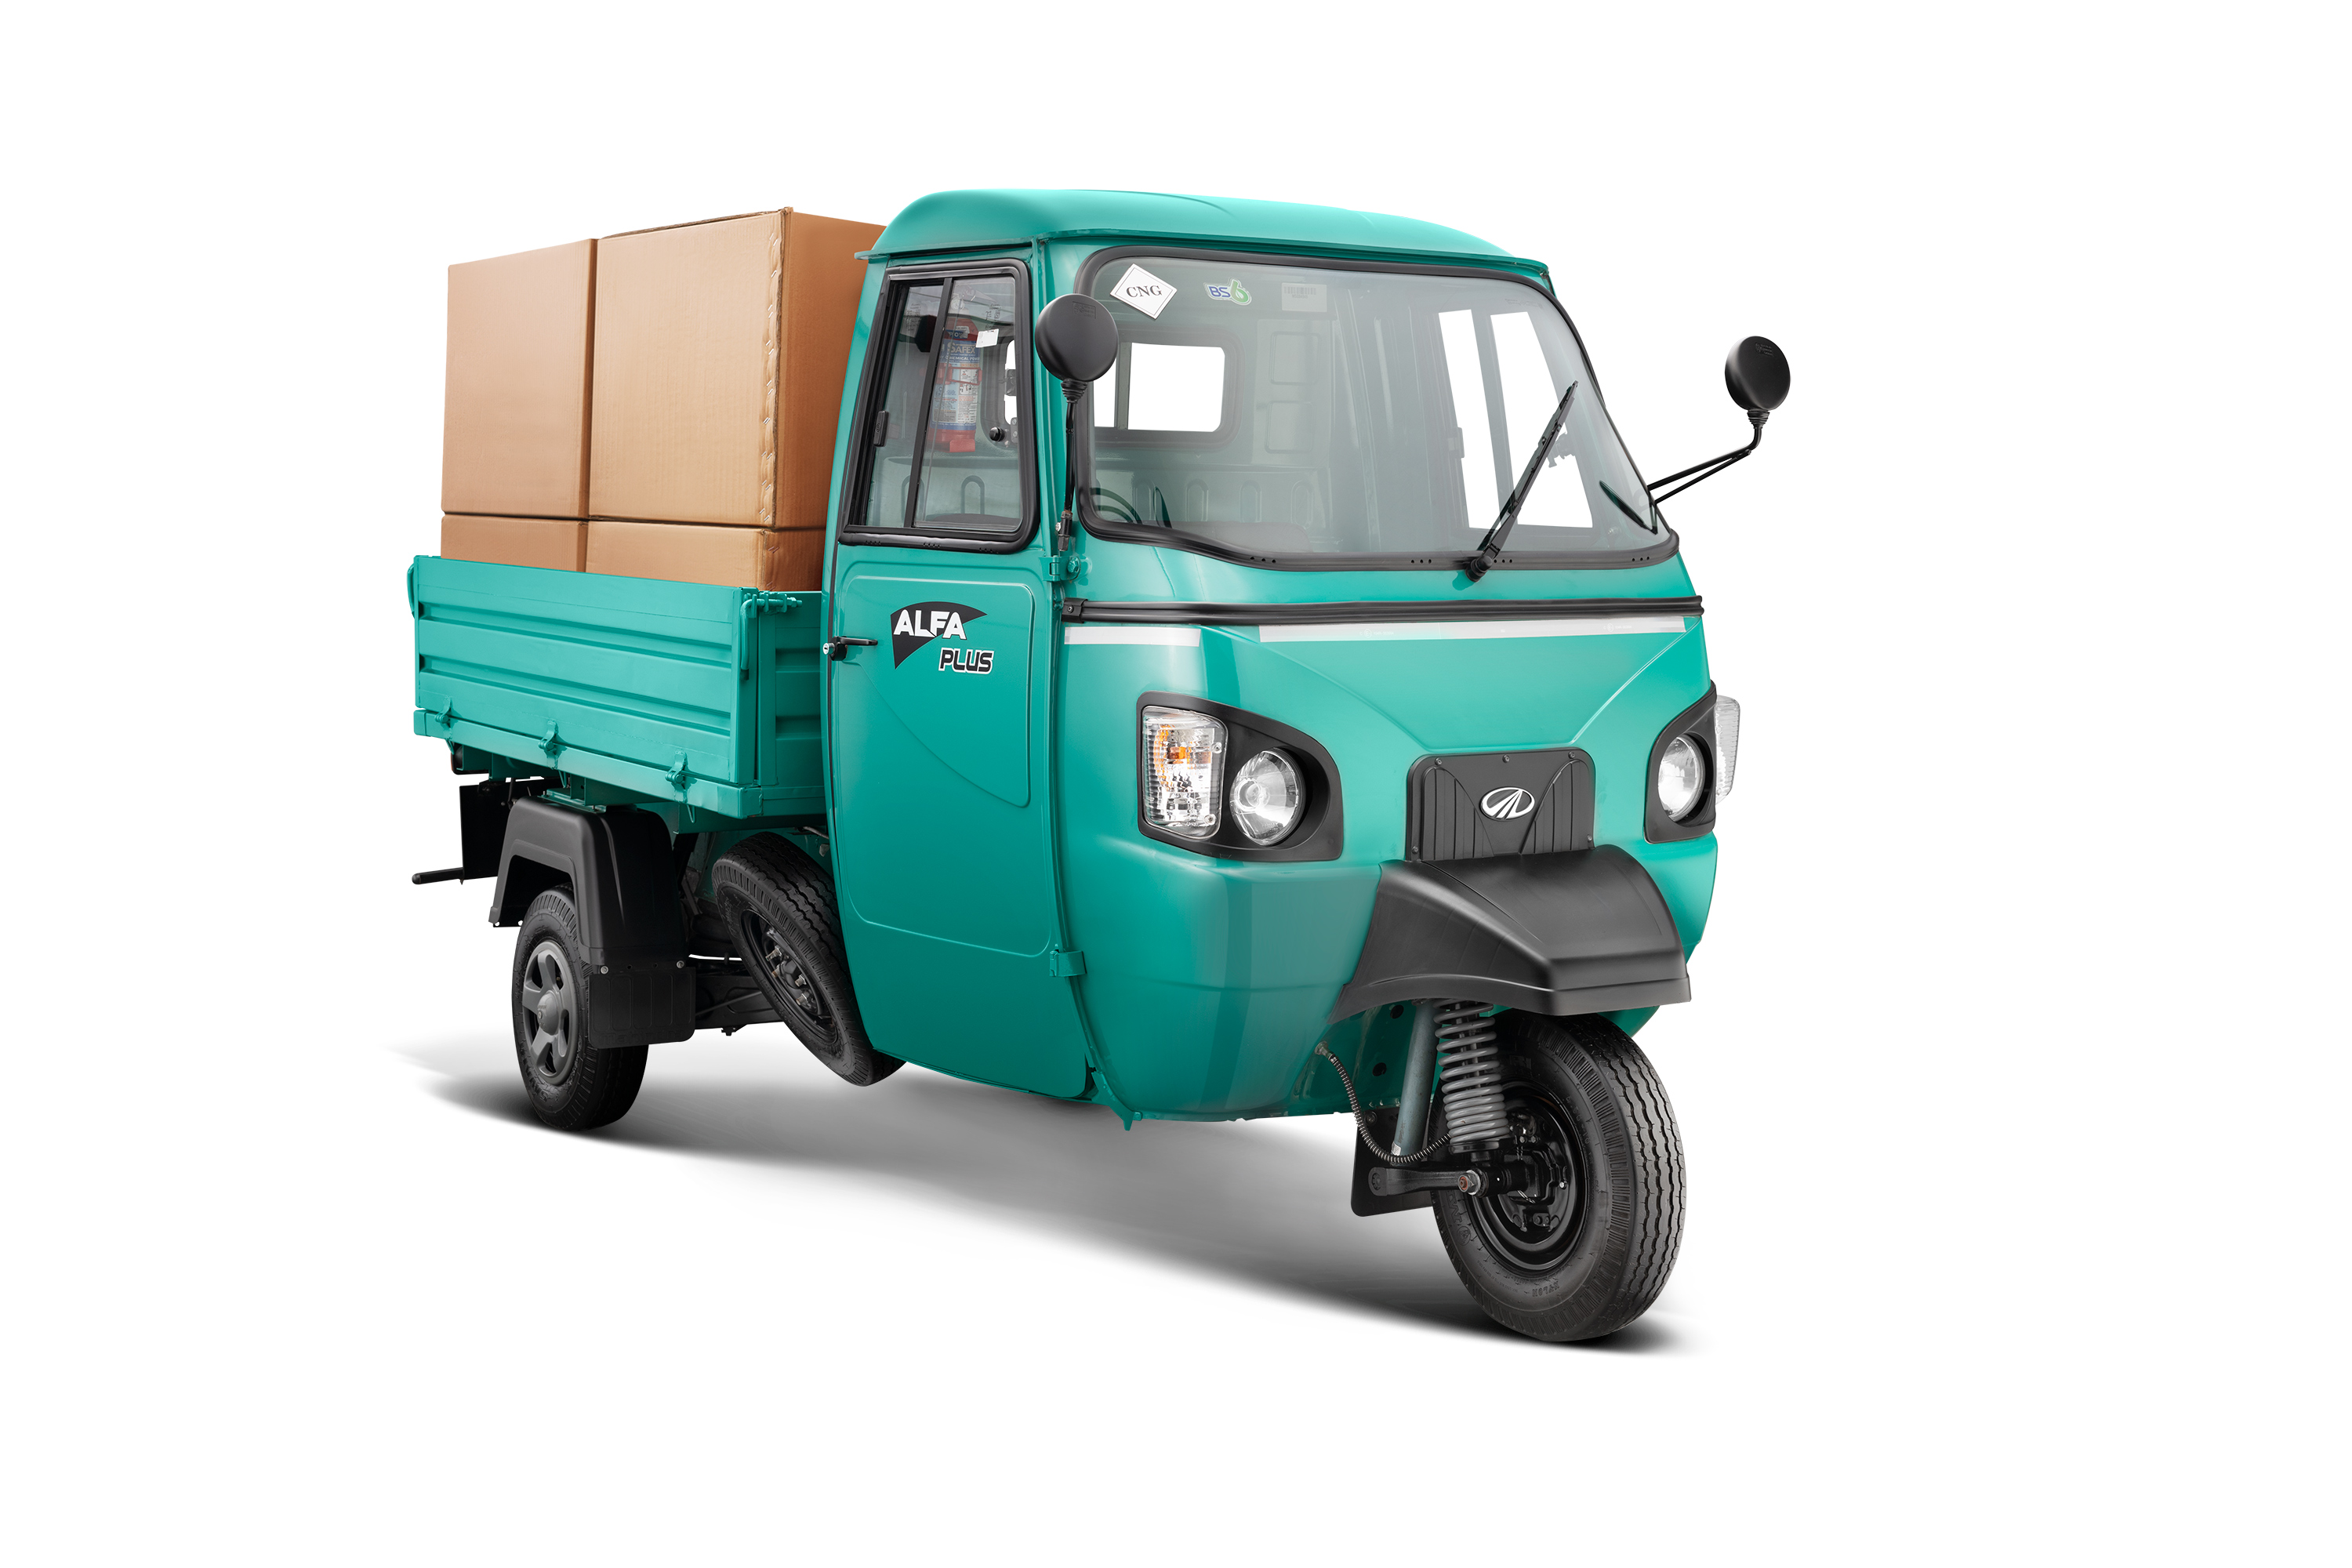 mahindra-launches-new-alfa-cng-in-cargo-and-passenger-variant-2